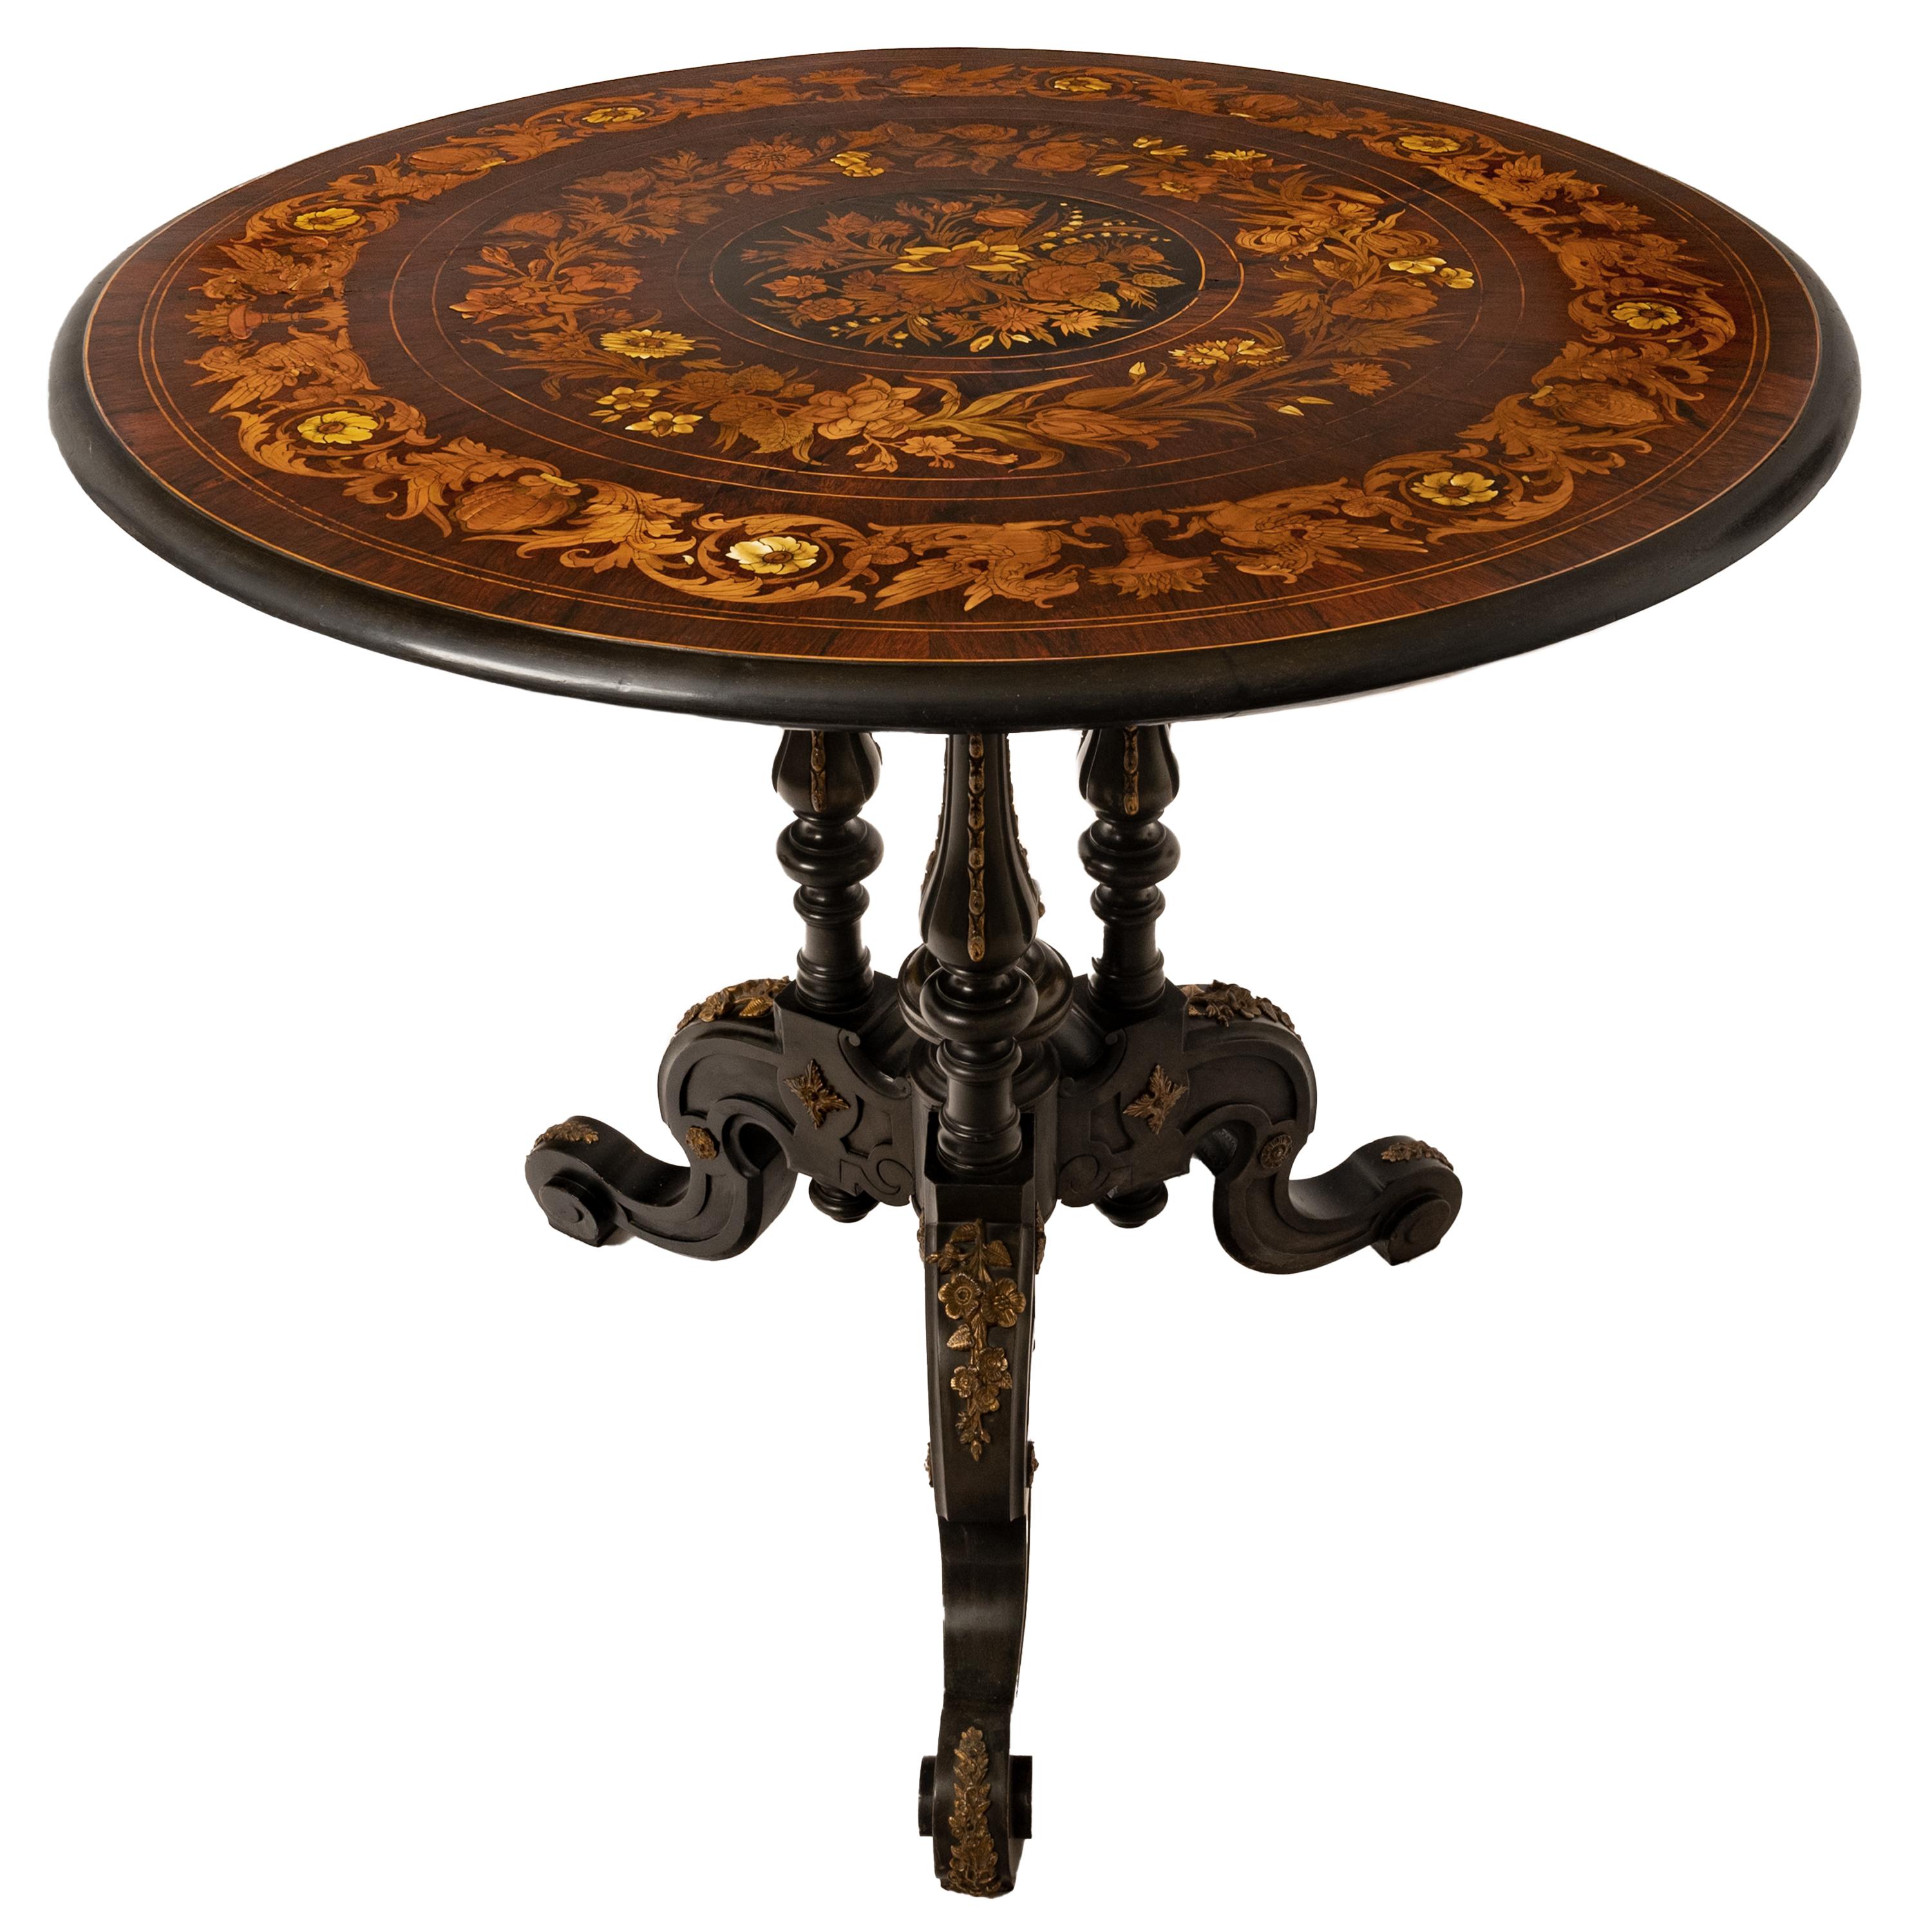 A very fine antique French Louis XV style, circular tilt-top marquetry pedestal tripod table, with gilt bronze ormolu mounts, attributed to Joseph Cremer circa 1870.
The round rosewood table top is sumptuously inlaid with many specimen woods, the